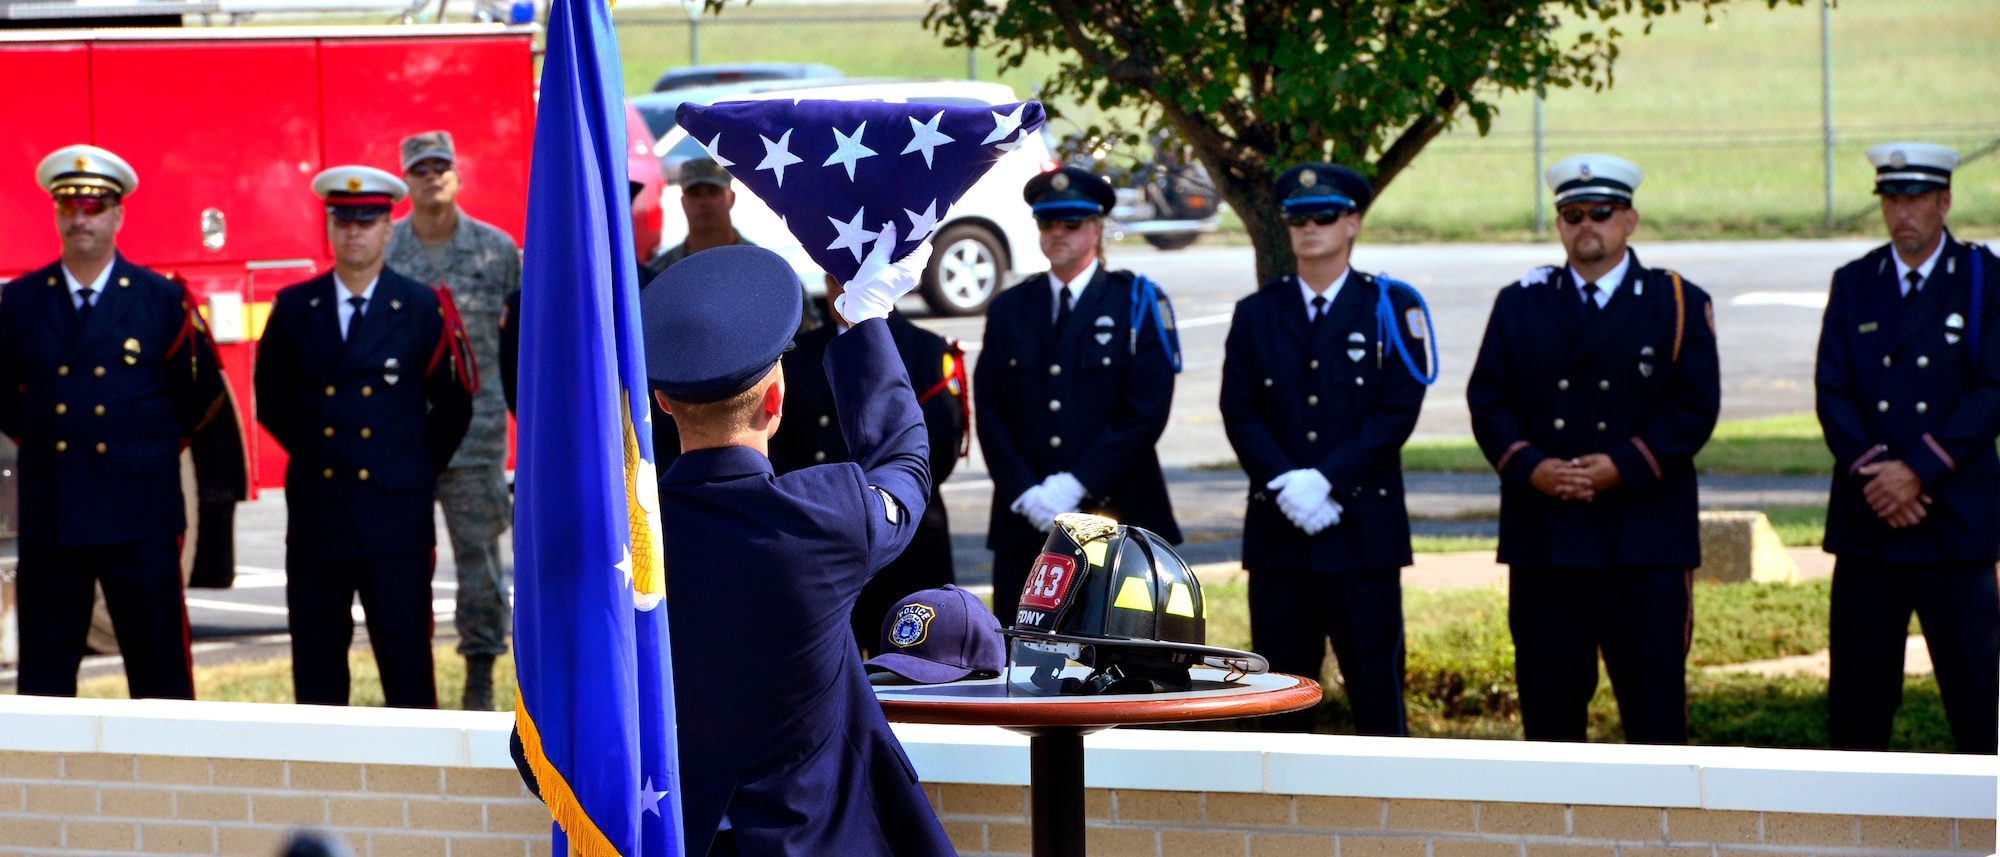 Airman 1st Class Dallas Gullion, 436th Civil Engineer Squadron fire fighter, places a folded American flag on the memorial altar at the dedication ceremony of the Sept. 11 Memorial, Sept. 11, 2013,at the Air Mobility Command Museum on Dover Air Force Base, Del. The memorial, which incorporates two pieces of steel from World Trade Center tower one, a rock from the United Airlines Flight 93 crash site and a block from the damaged portion of the Pentagon, was unveiled at the ceremony.  (U.S. Air Force photo/David S. Tucker)